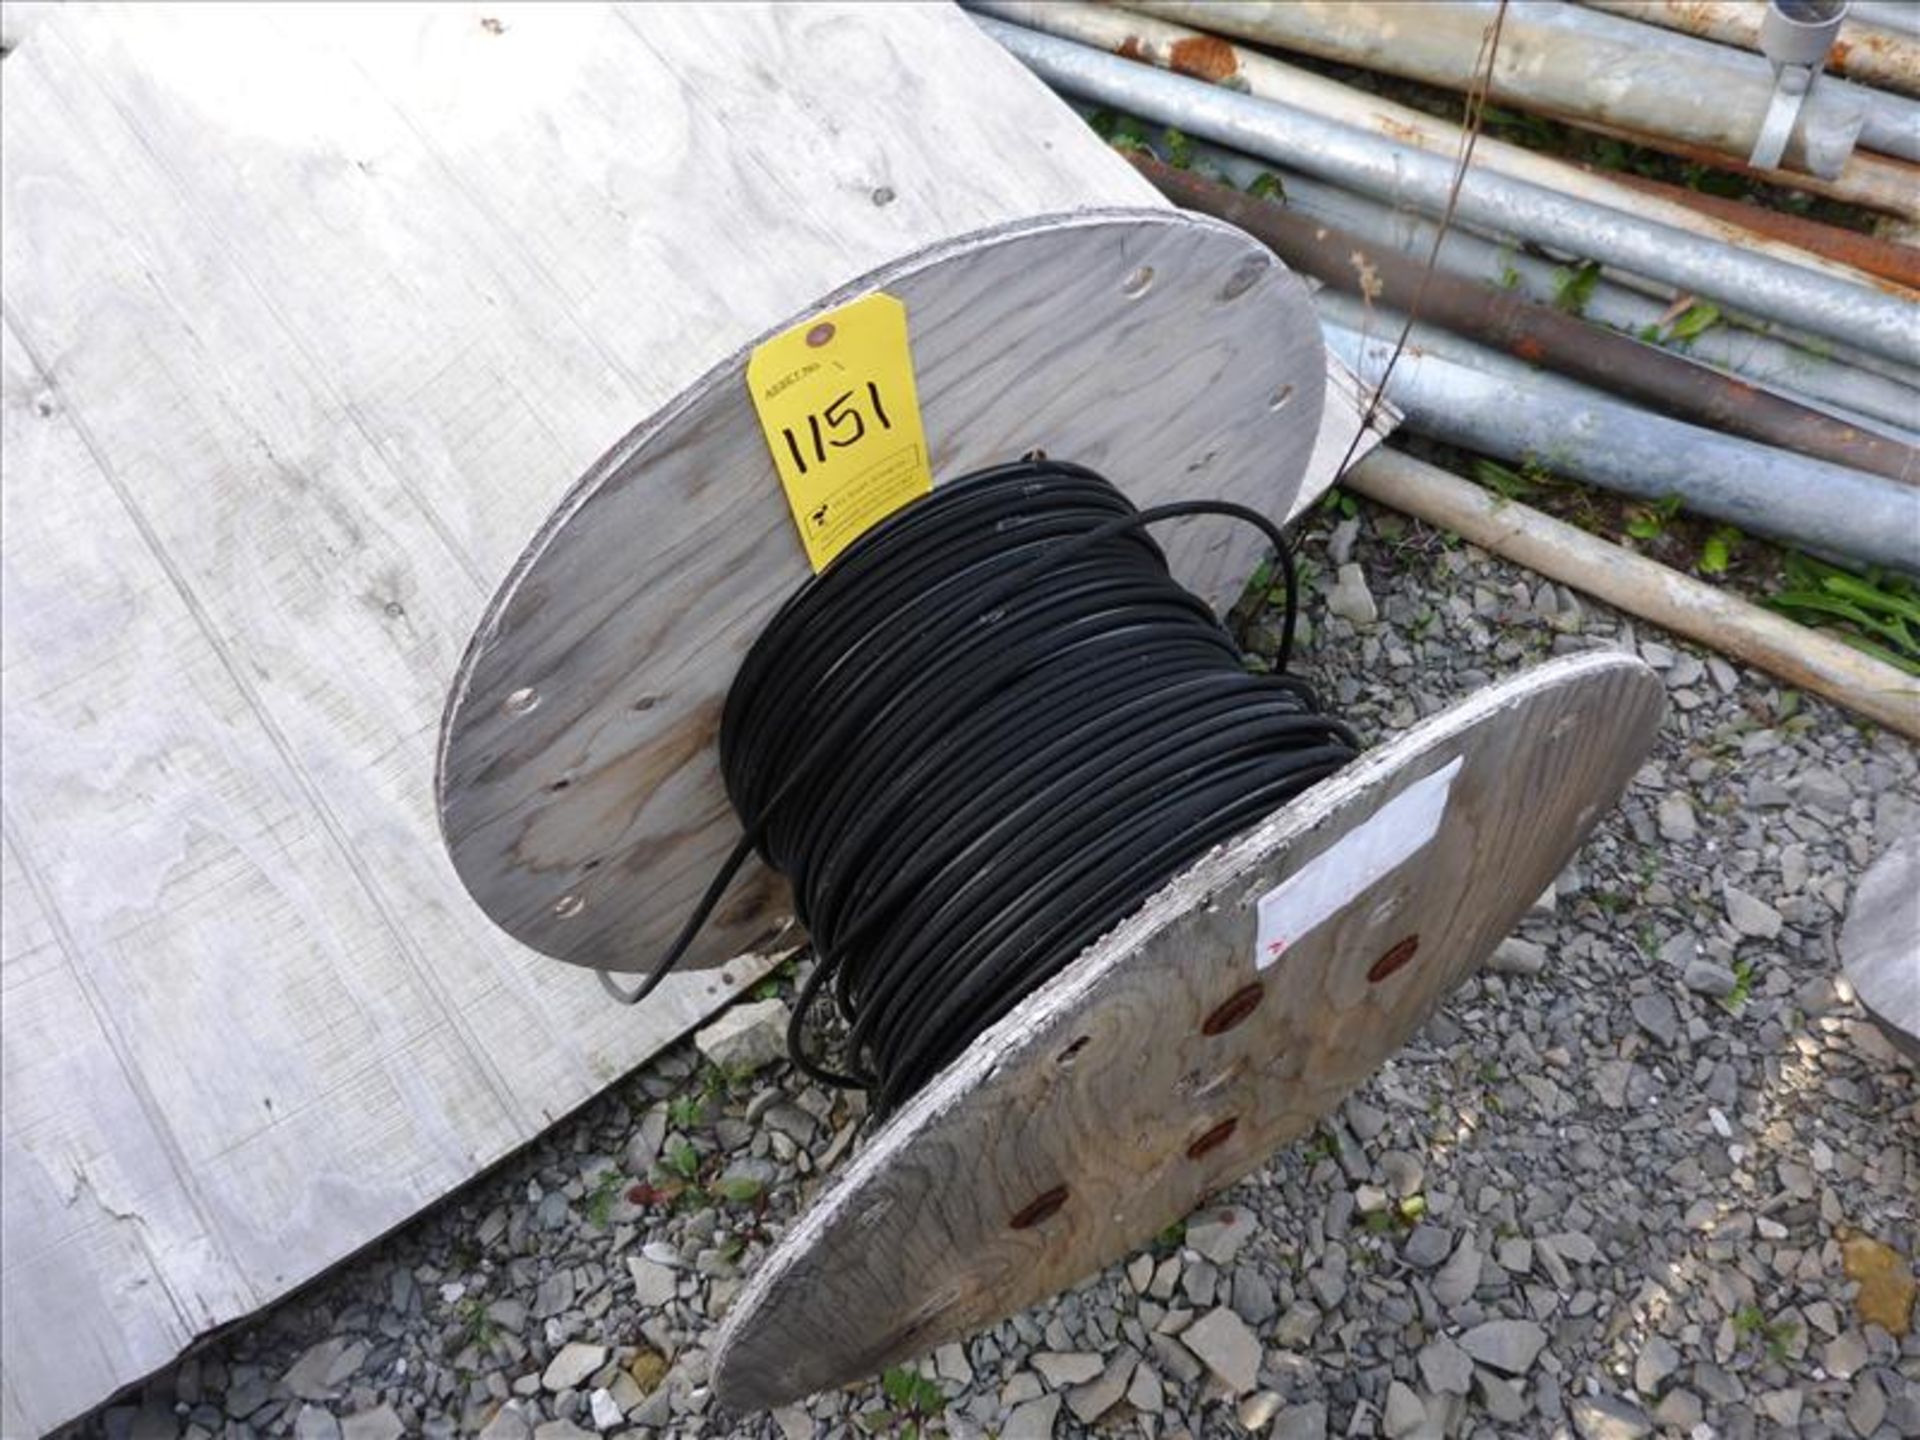 reel of electrical cable, approx. 200 ft., 10900 M -I- Aug/2013 Nexans Exelene 8 AWG (8.37 mm2)